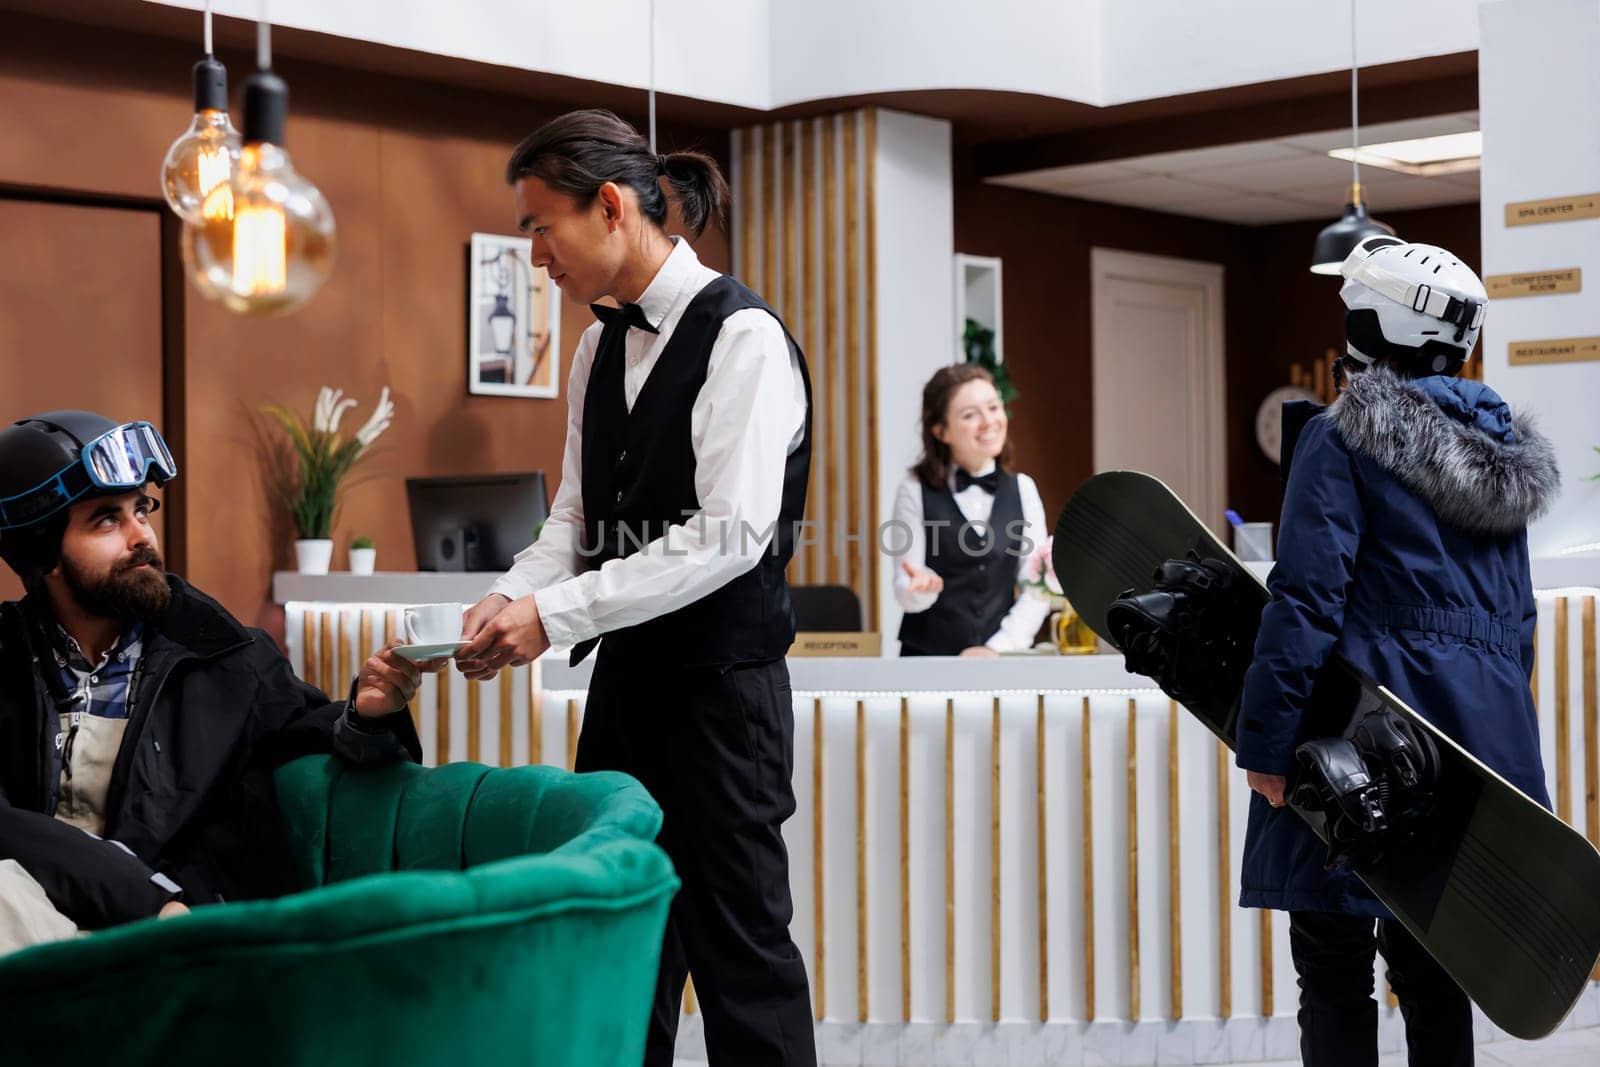 Arrival of female tourist carrying snowboard in hotel lobby for check-in with staff. Young waiter serving coffee to man on sofa. Winter holiday atmosphere with ski gear. Ski resort ensures happy stay.